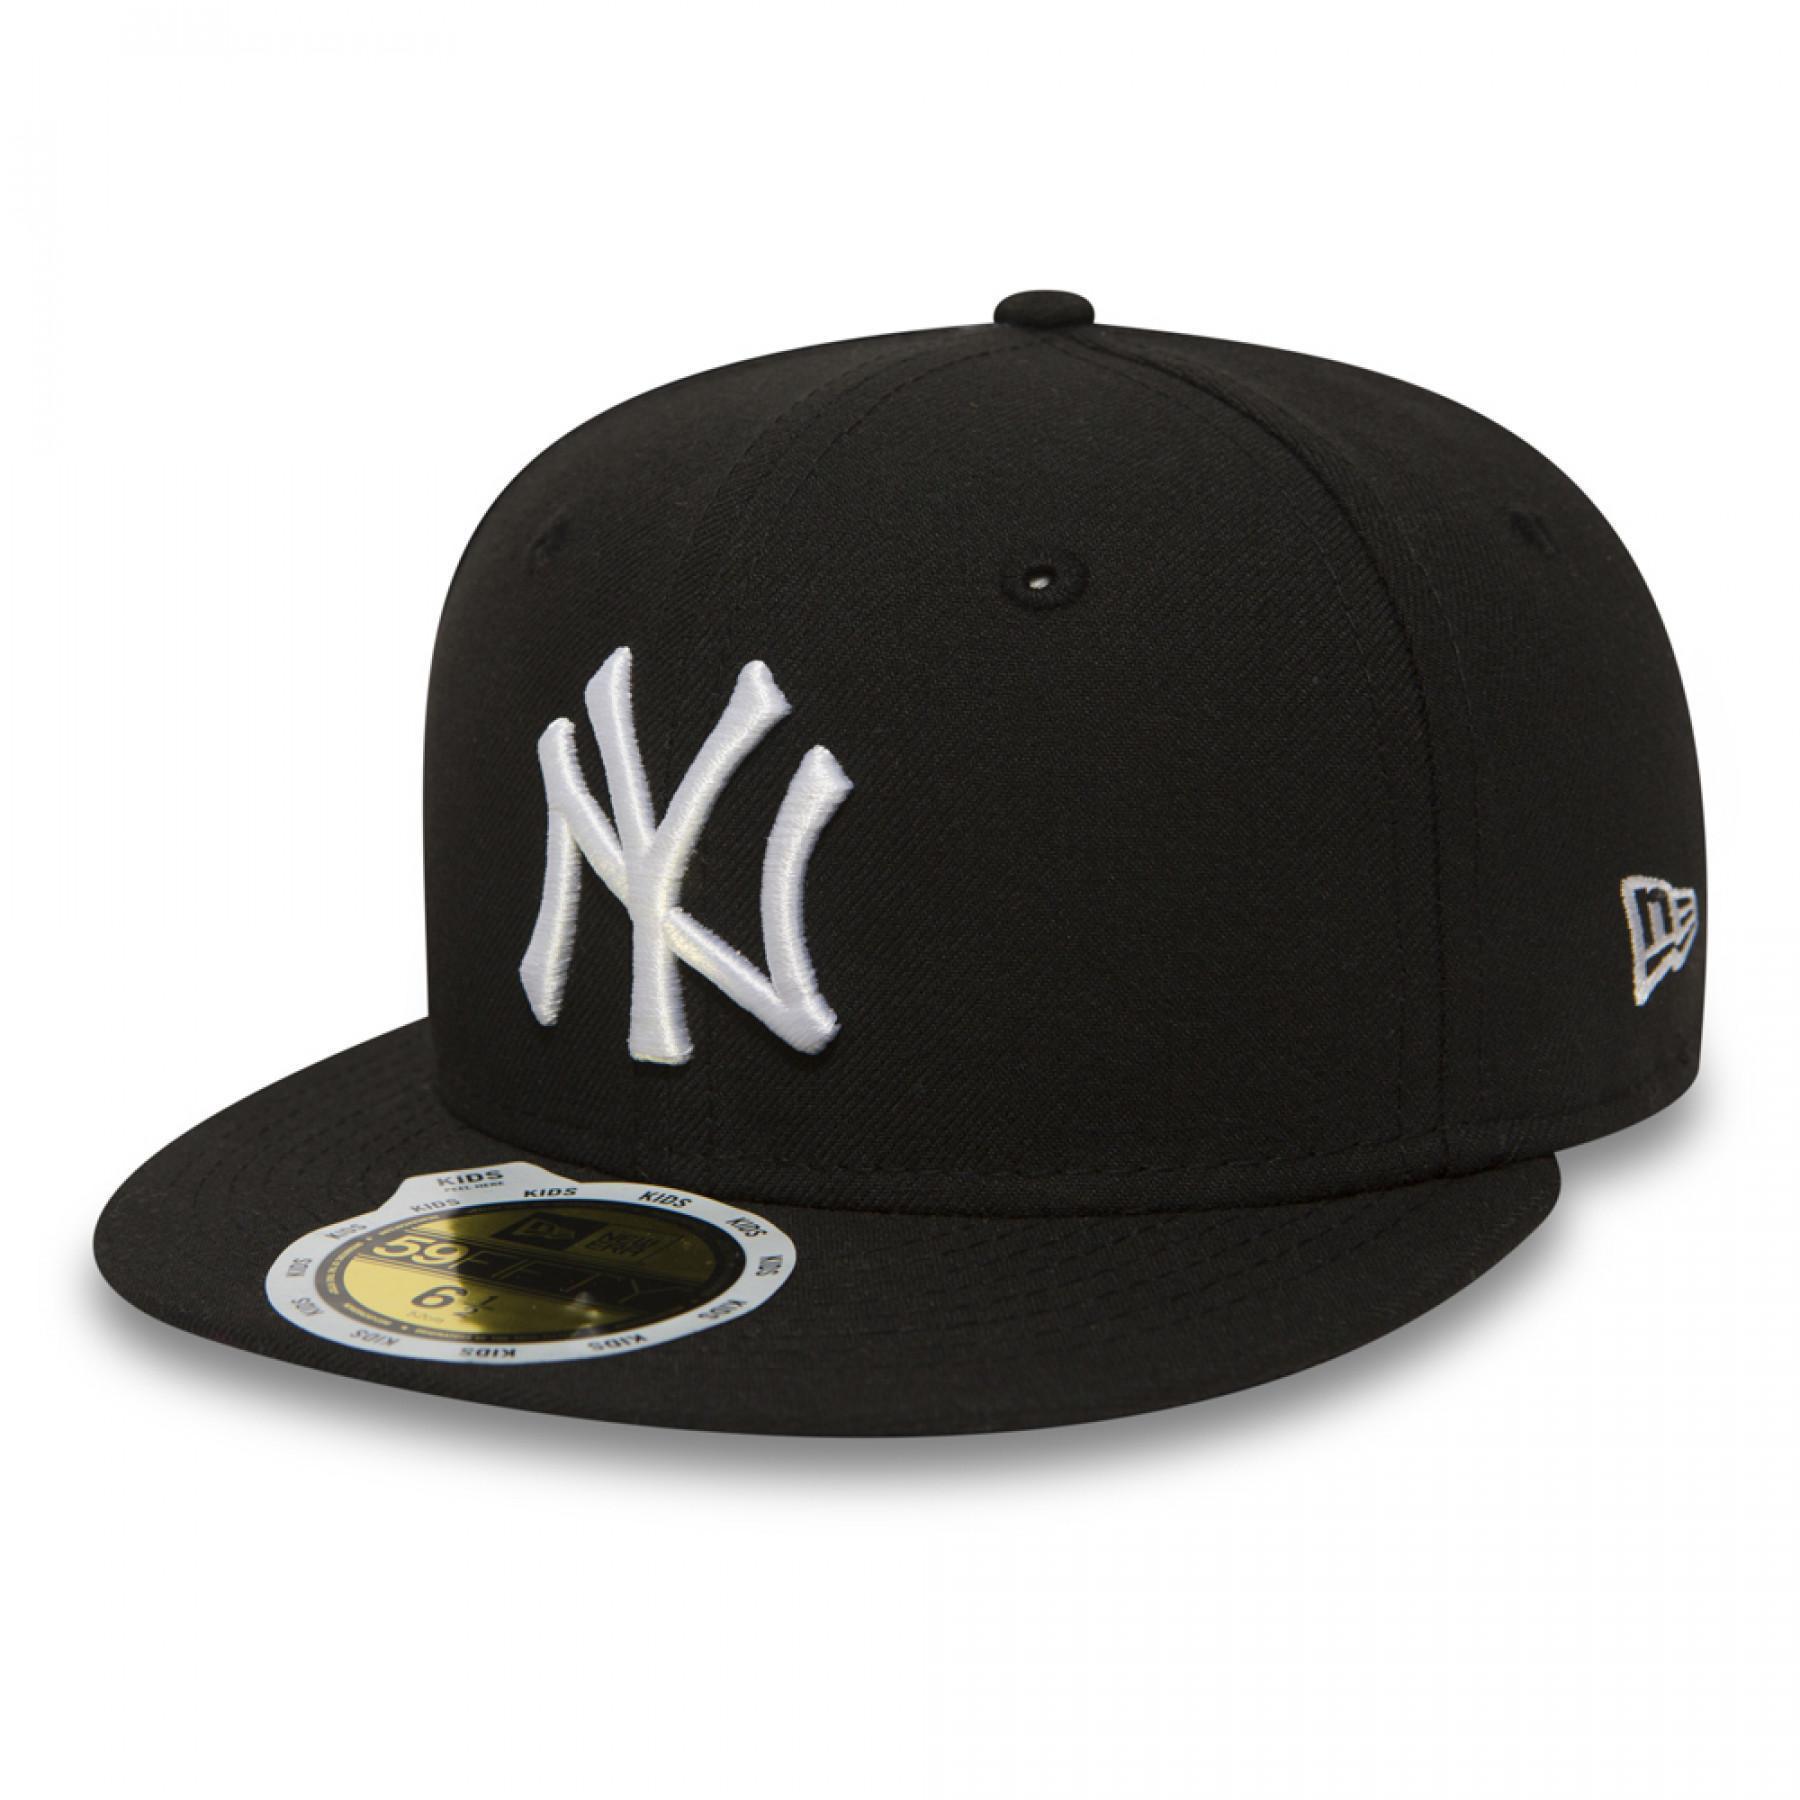 Casquette 59fifty fille Essential New York Yankees